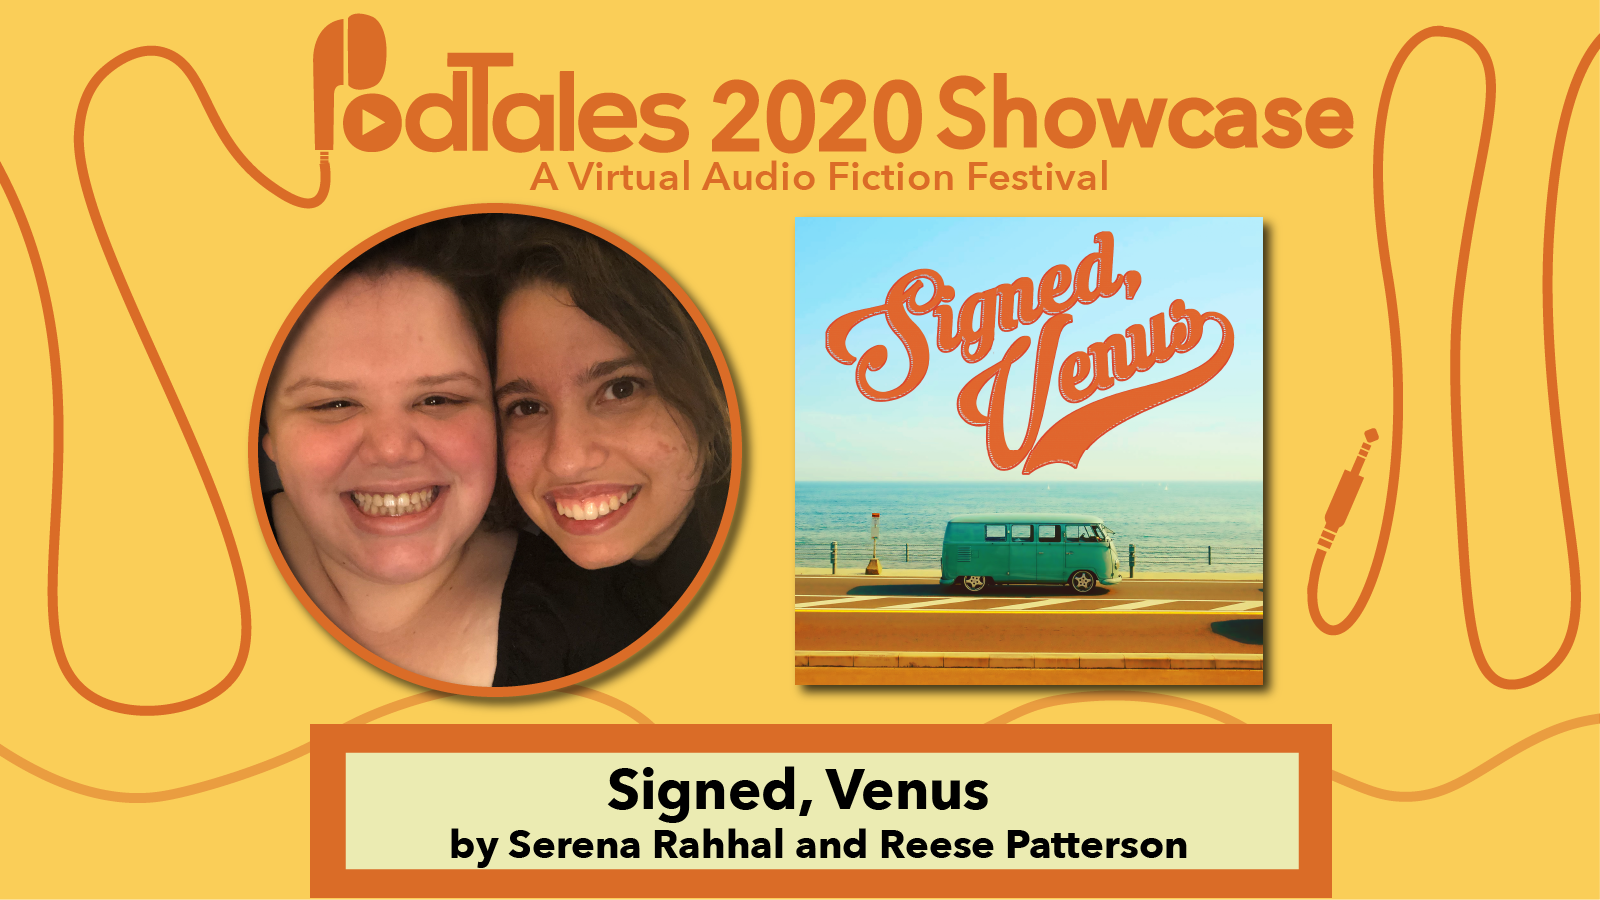 Text reading “PodTales 2020 Showcase: A Virtual Audio Fiction Festival”, Photo of Serena Rahhal and Reese Patterson, Show Art for Signed, Venus, Text reading “Signed, Venus by Serena Rahhal and Reese Patterson”